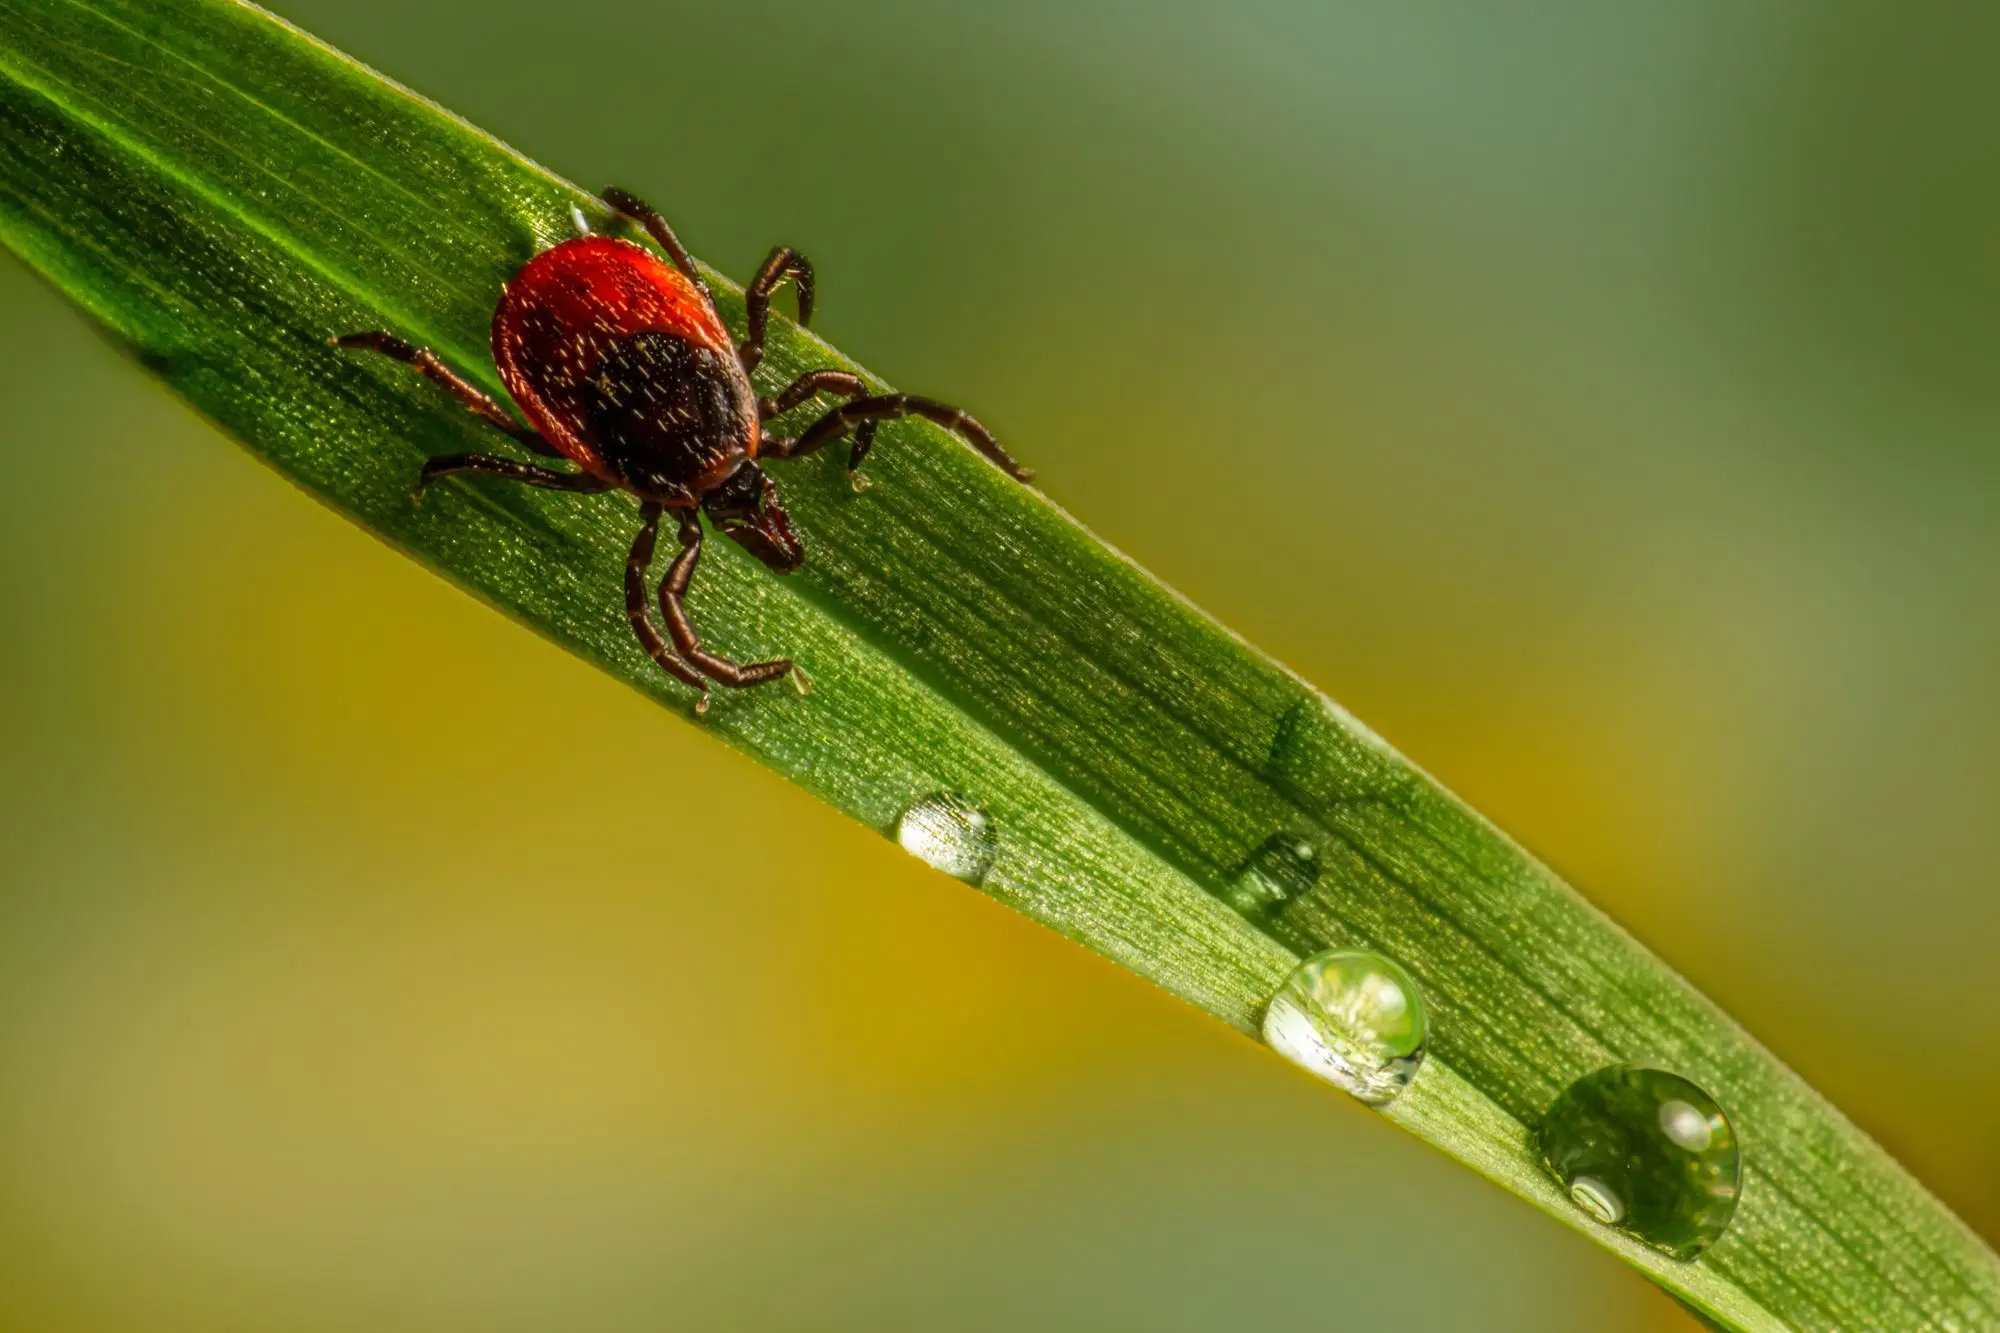 Tick season really isn't far off. Get equipped to face it